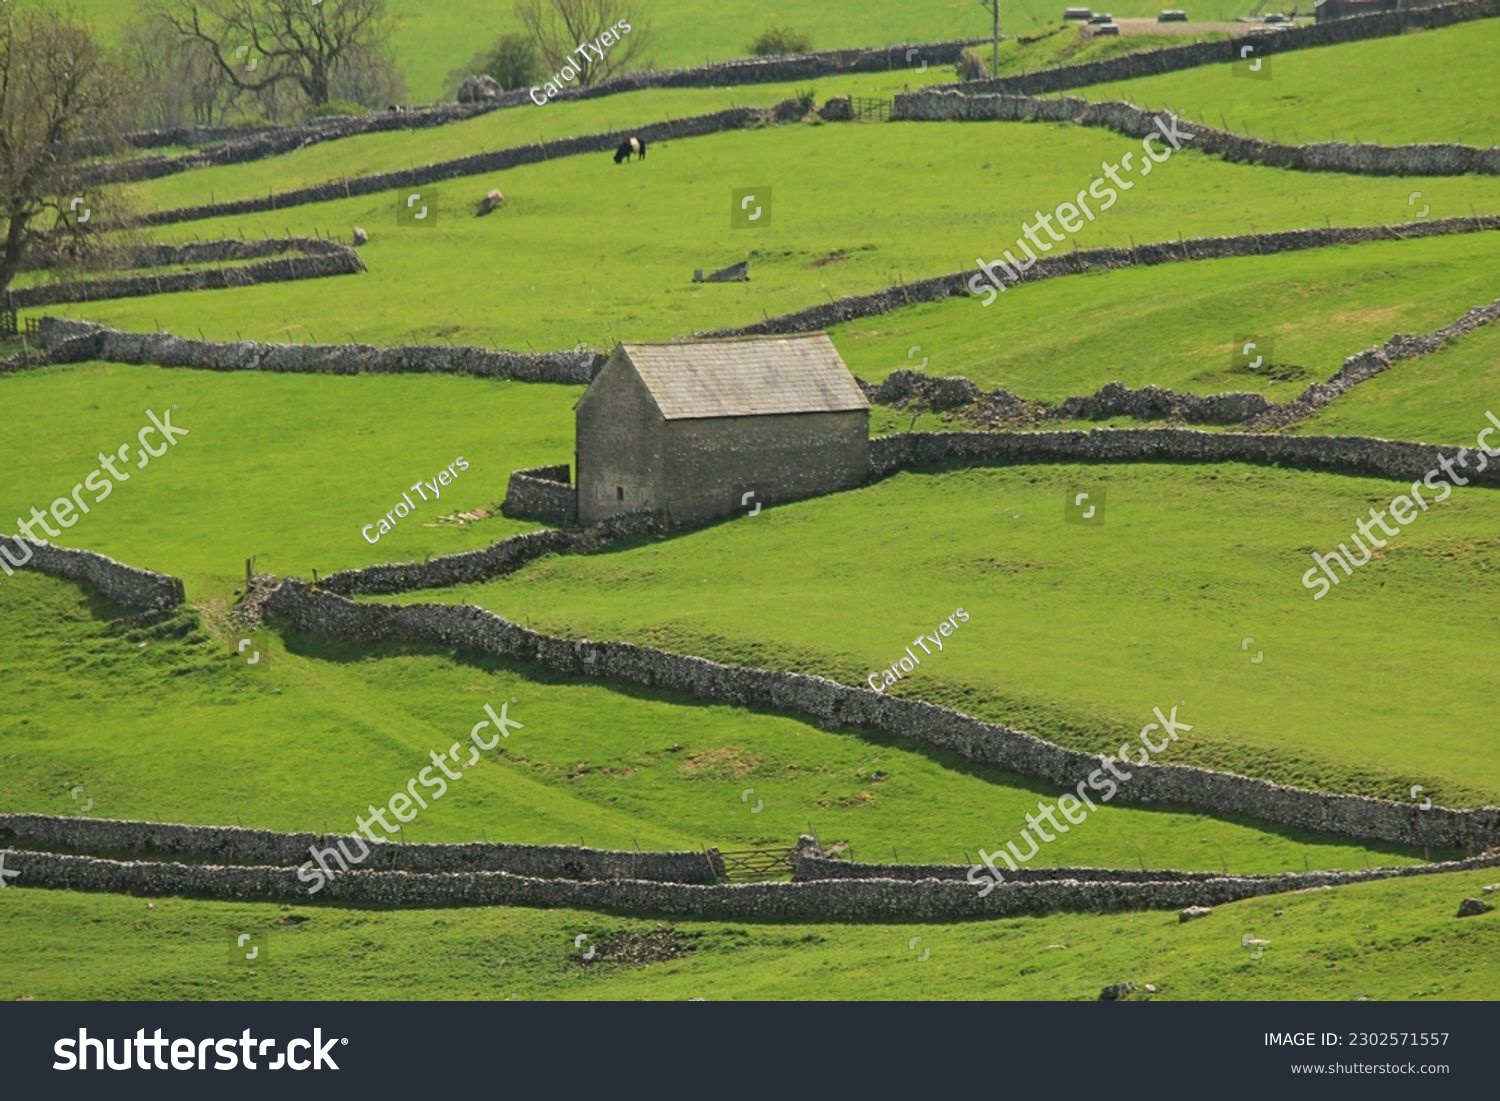 Looking down from the top of Malham Cove at a Landscape of green pasture and dry stone walls typical of the Yorkshire Dales #2302571557